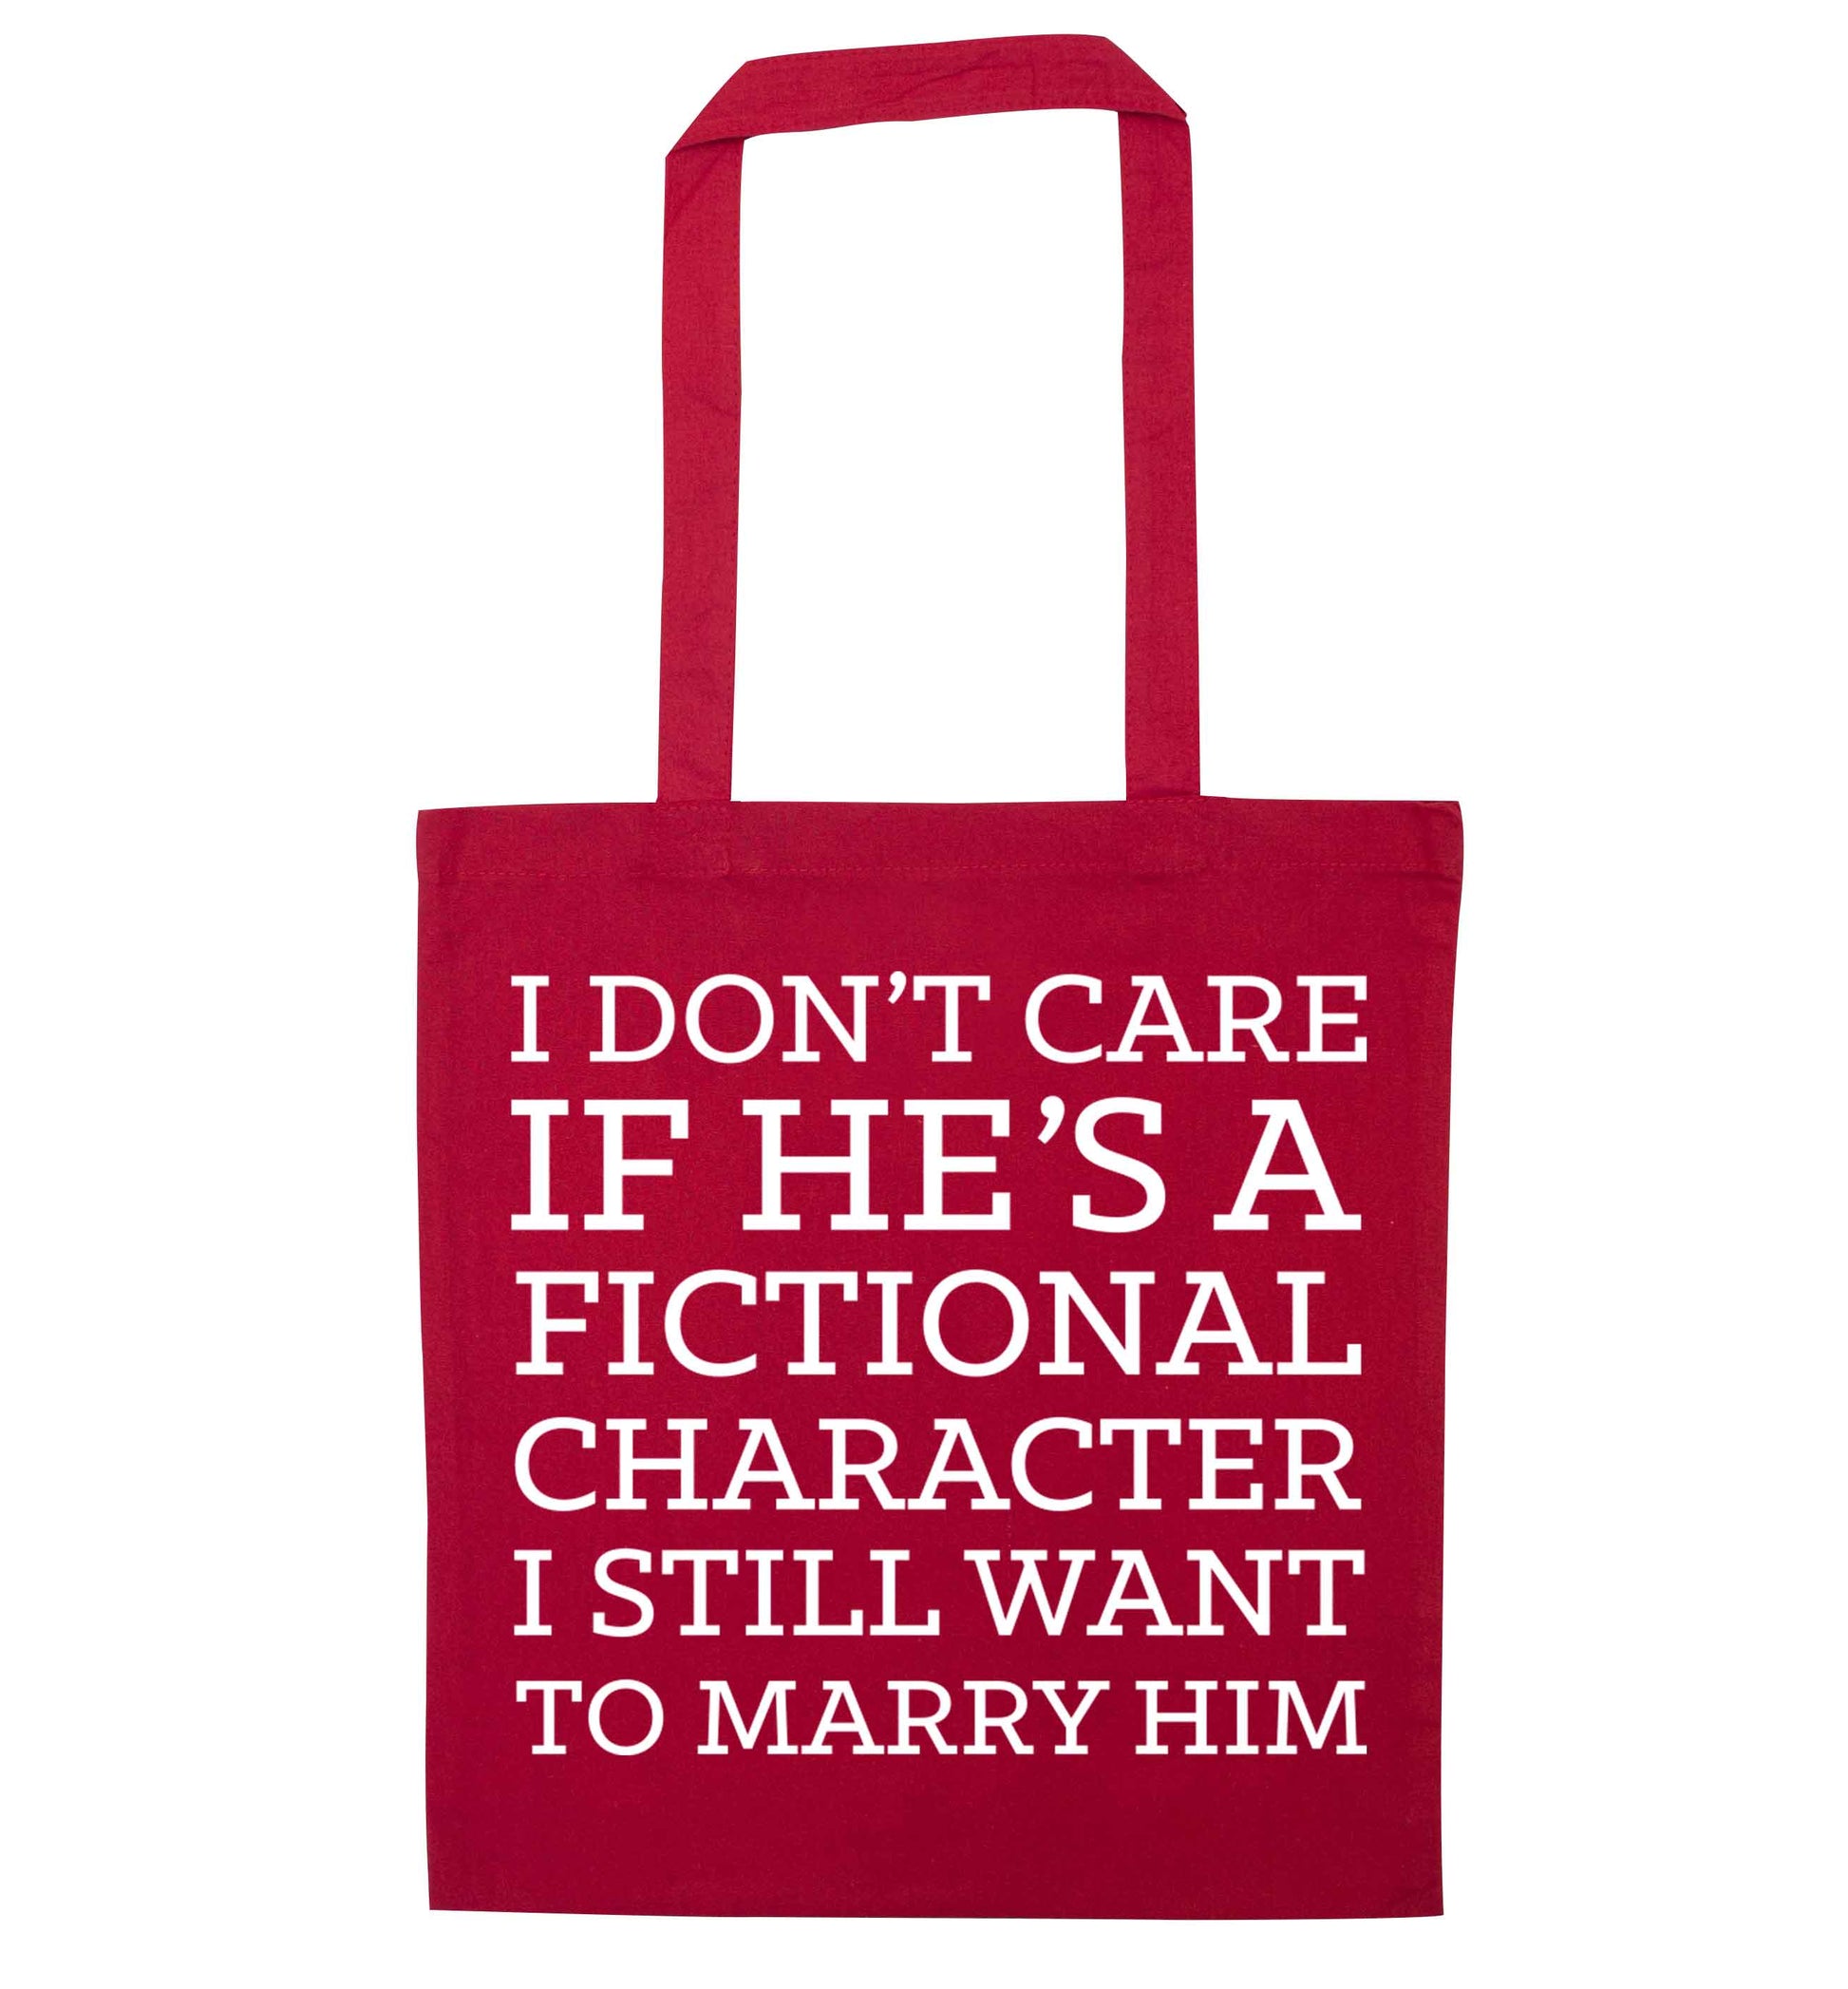 I don't care if he's a fictional character I still want to marry him red tote bag